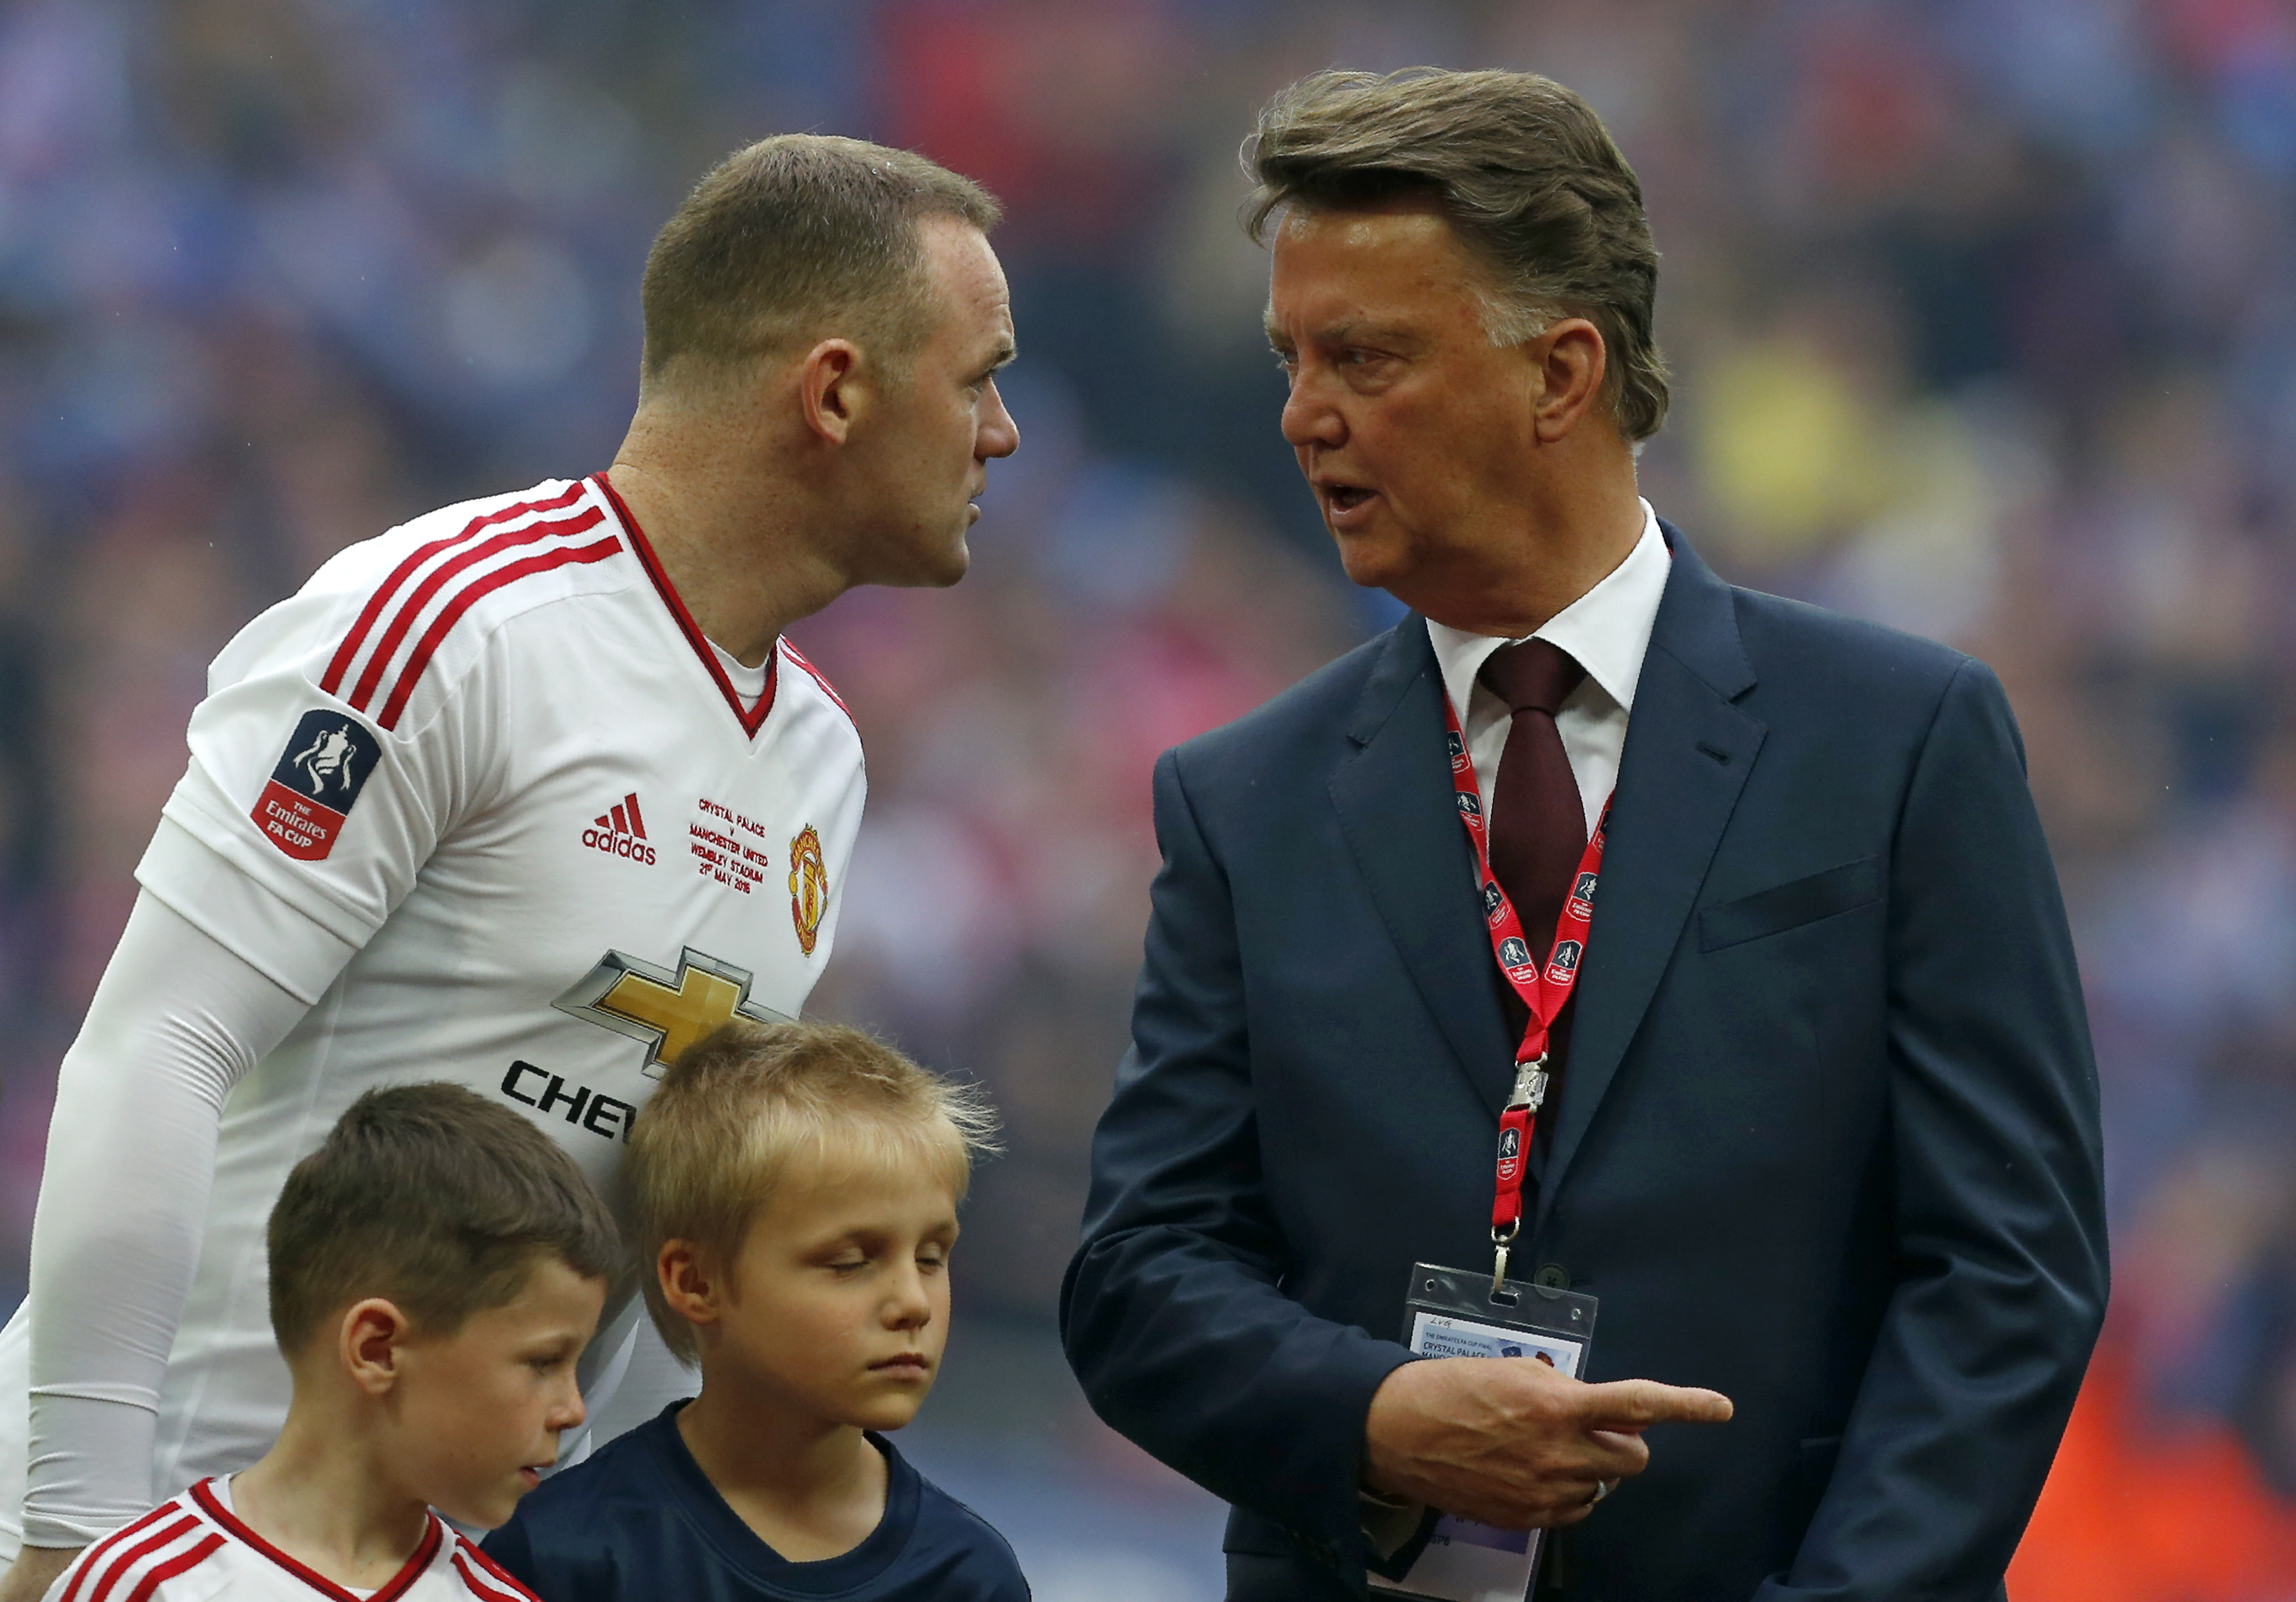 Manchester United's Dutch manager Louis van Gaal (R) speaks with Manchester United's English striker Wayne Rooney before the start of the FA Cup trophy following the English FA Cup final football match between Crystal Palace and Manchester United at Wembley stadium in London on May 21, 2016. / AFP PHOTO / Ian Kington / NOT FOR MARKETING OR ADVERTISING USE / RESTRICTED TO EDITORIAL USE